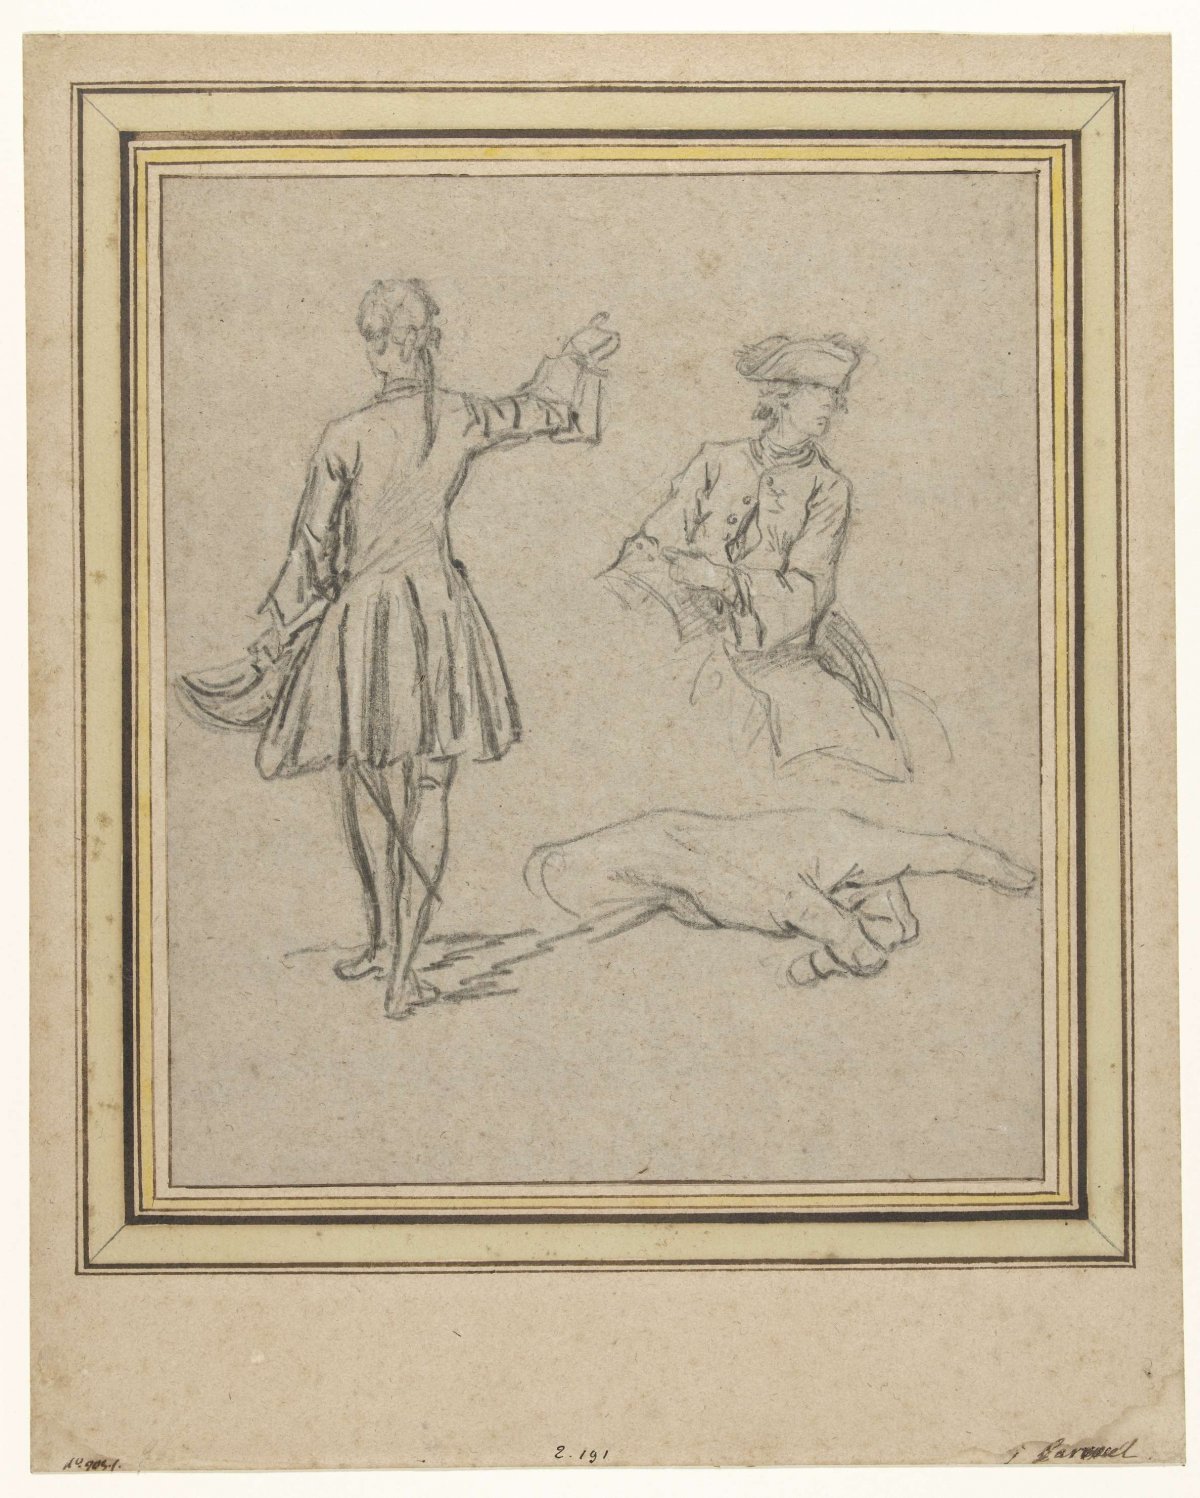 Study sheet showing a standing man, a semi-figure of a horseman and a hand, Charles Parrocel, 1698 - 1752